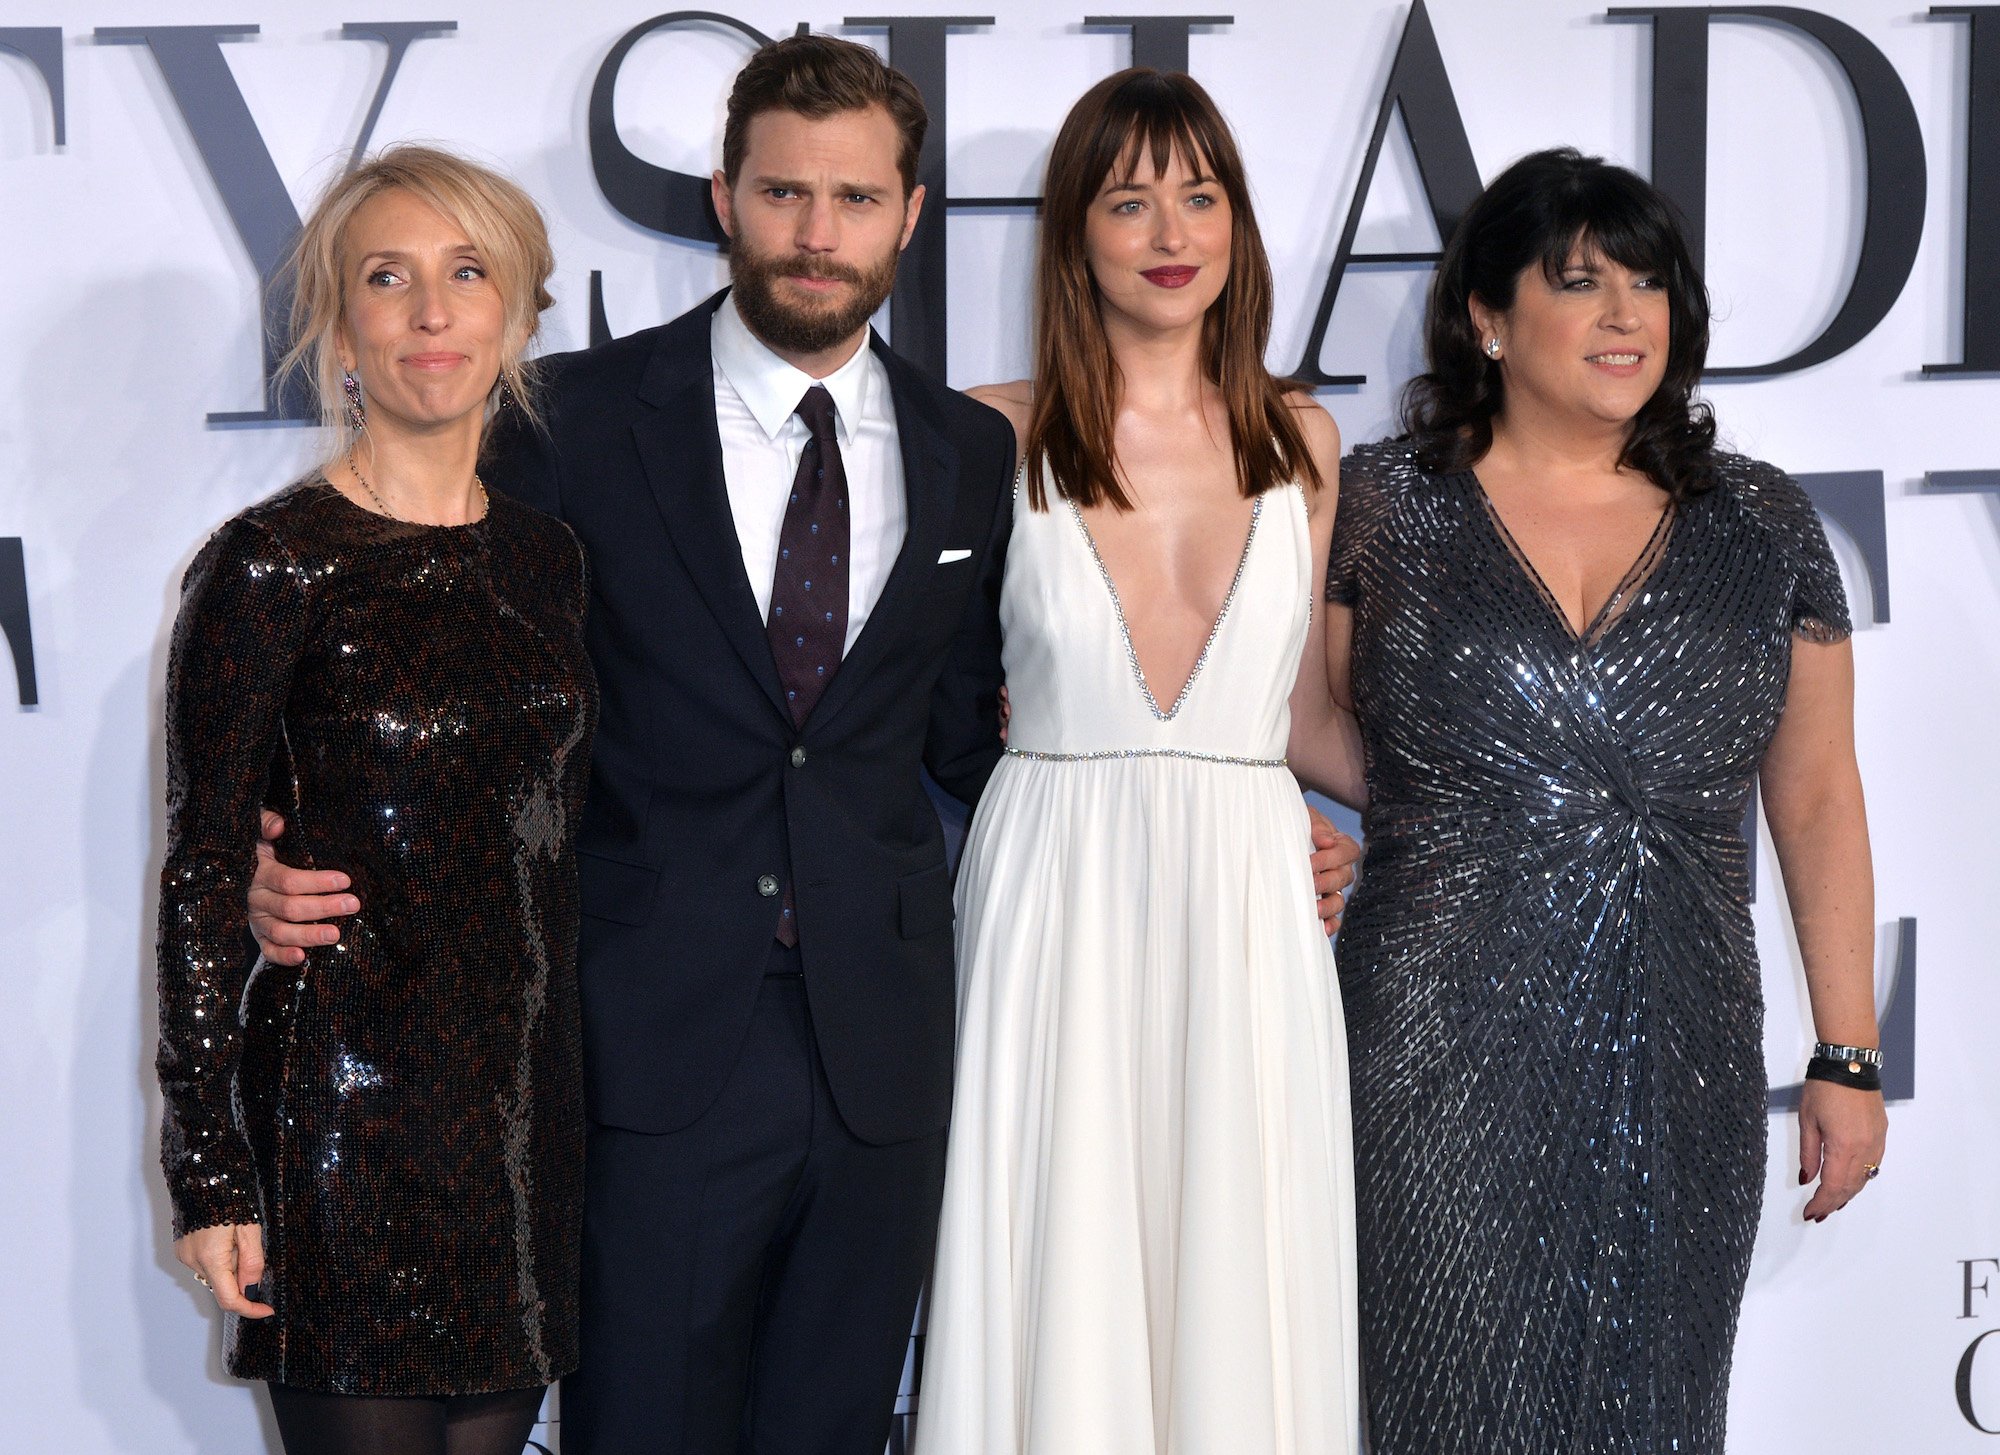 The ‘Fifty Shades of Grey’ Director Said it Was ‘Incredibly Painful’ to Work With Author E. L. James